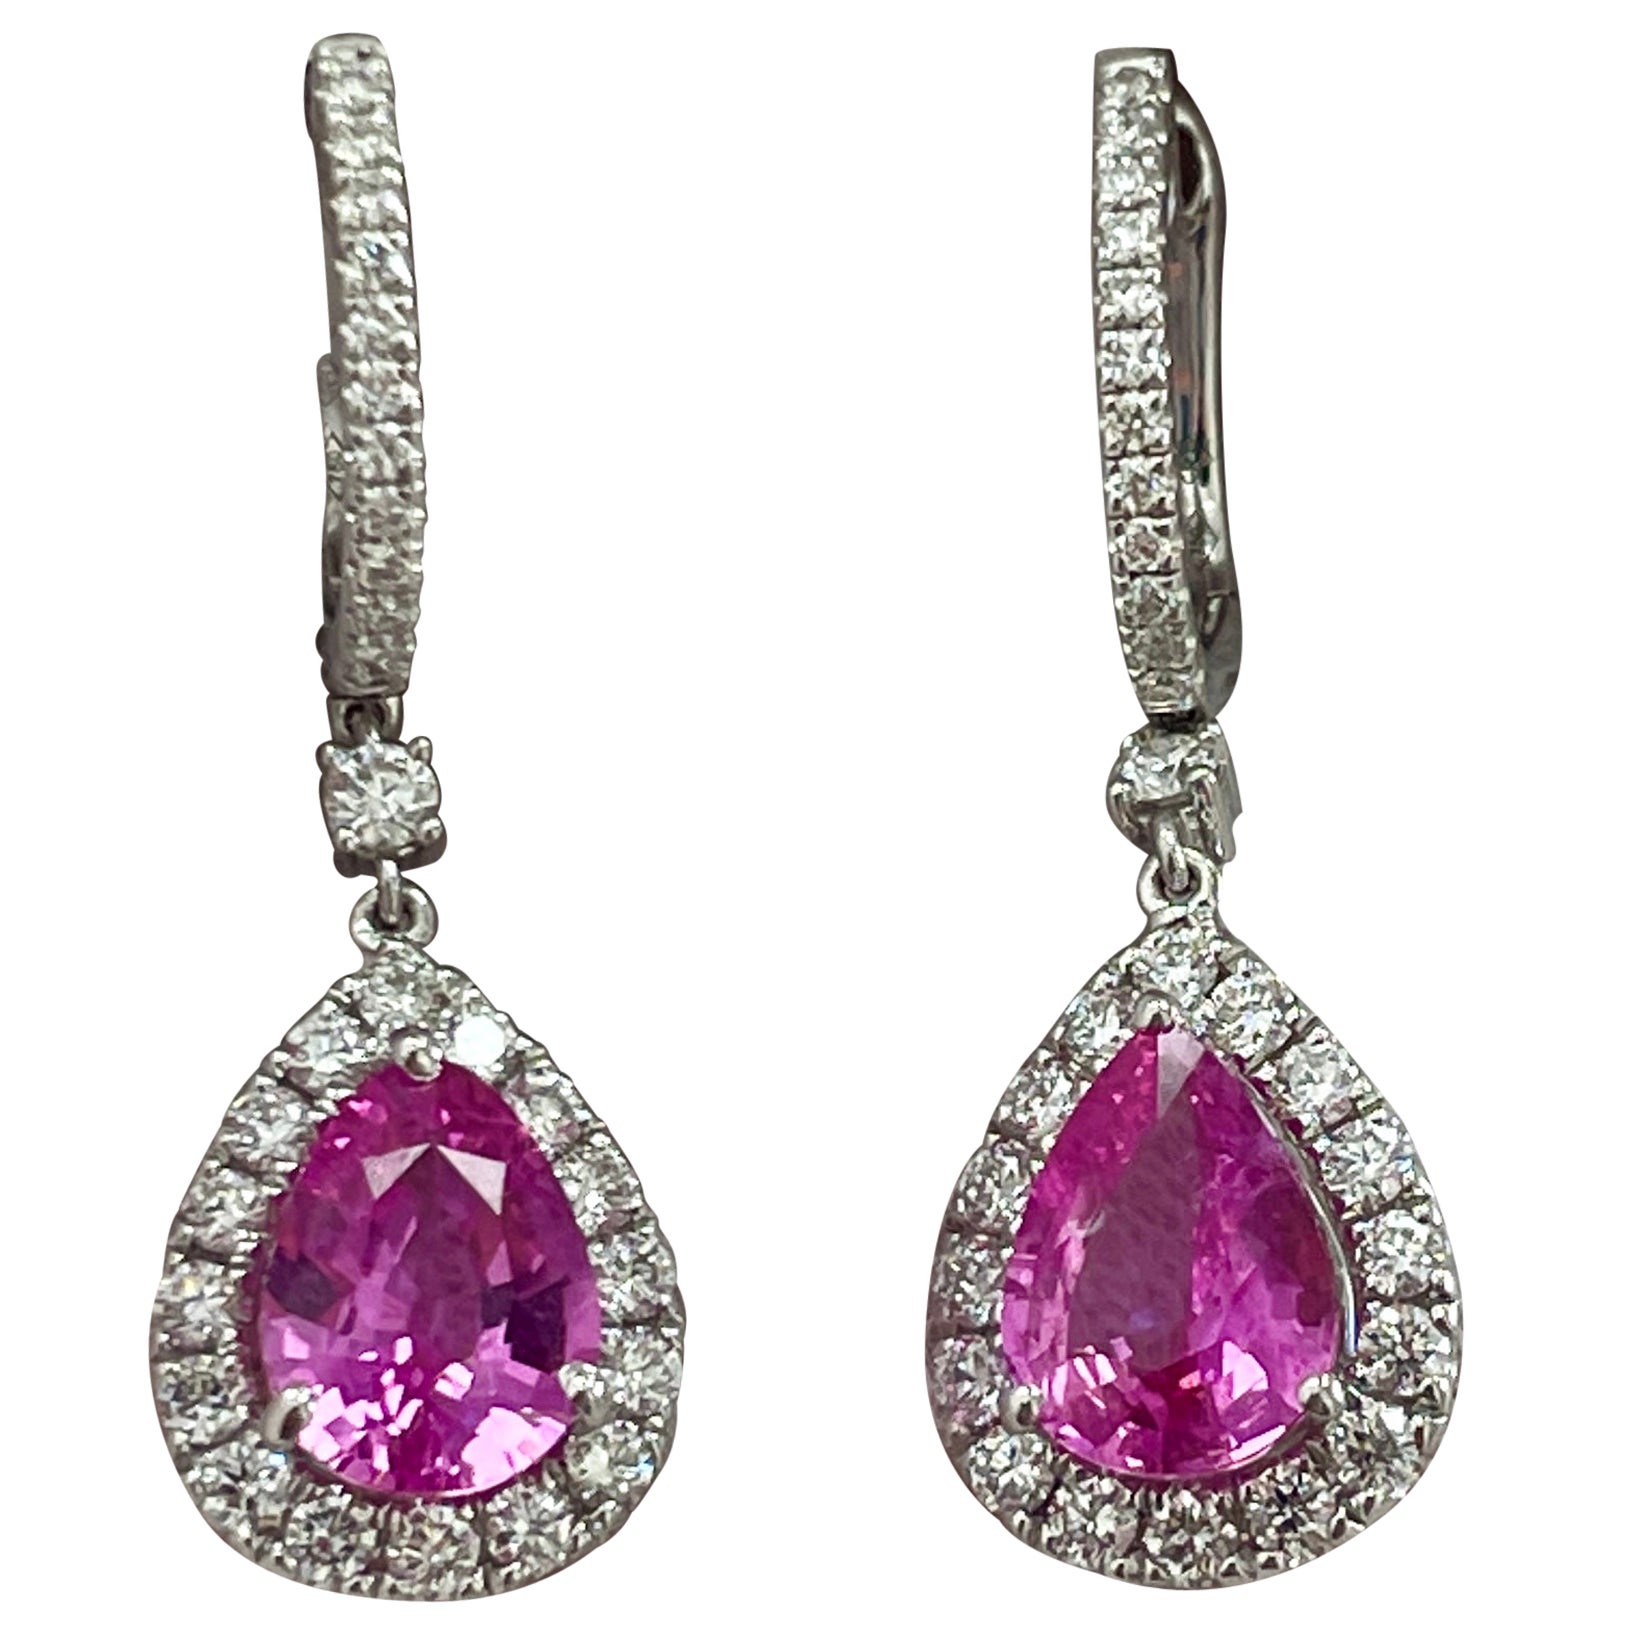 3.10 Carat Pink Sapphire, Diamond & White Gold Earrings For Sale